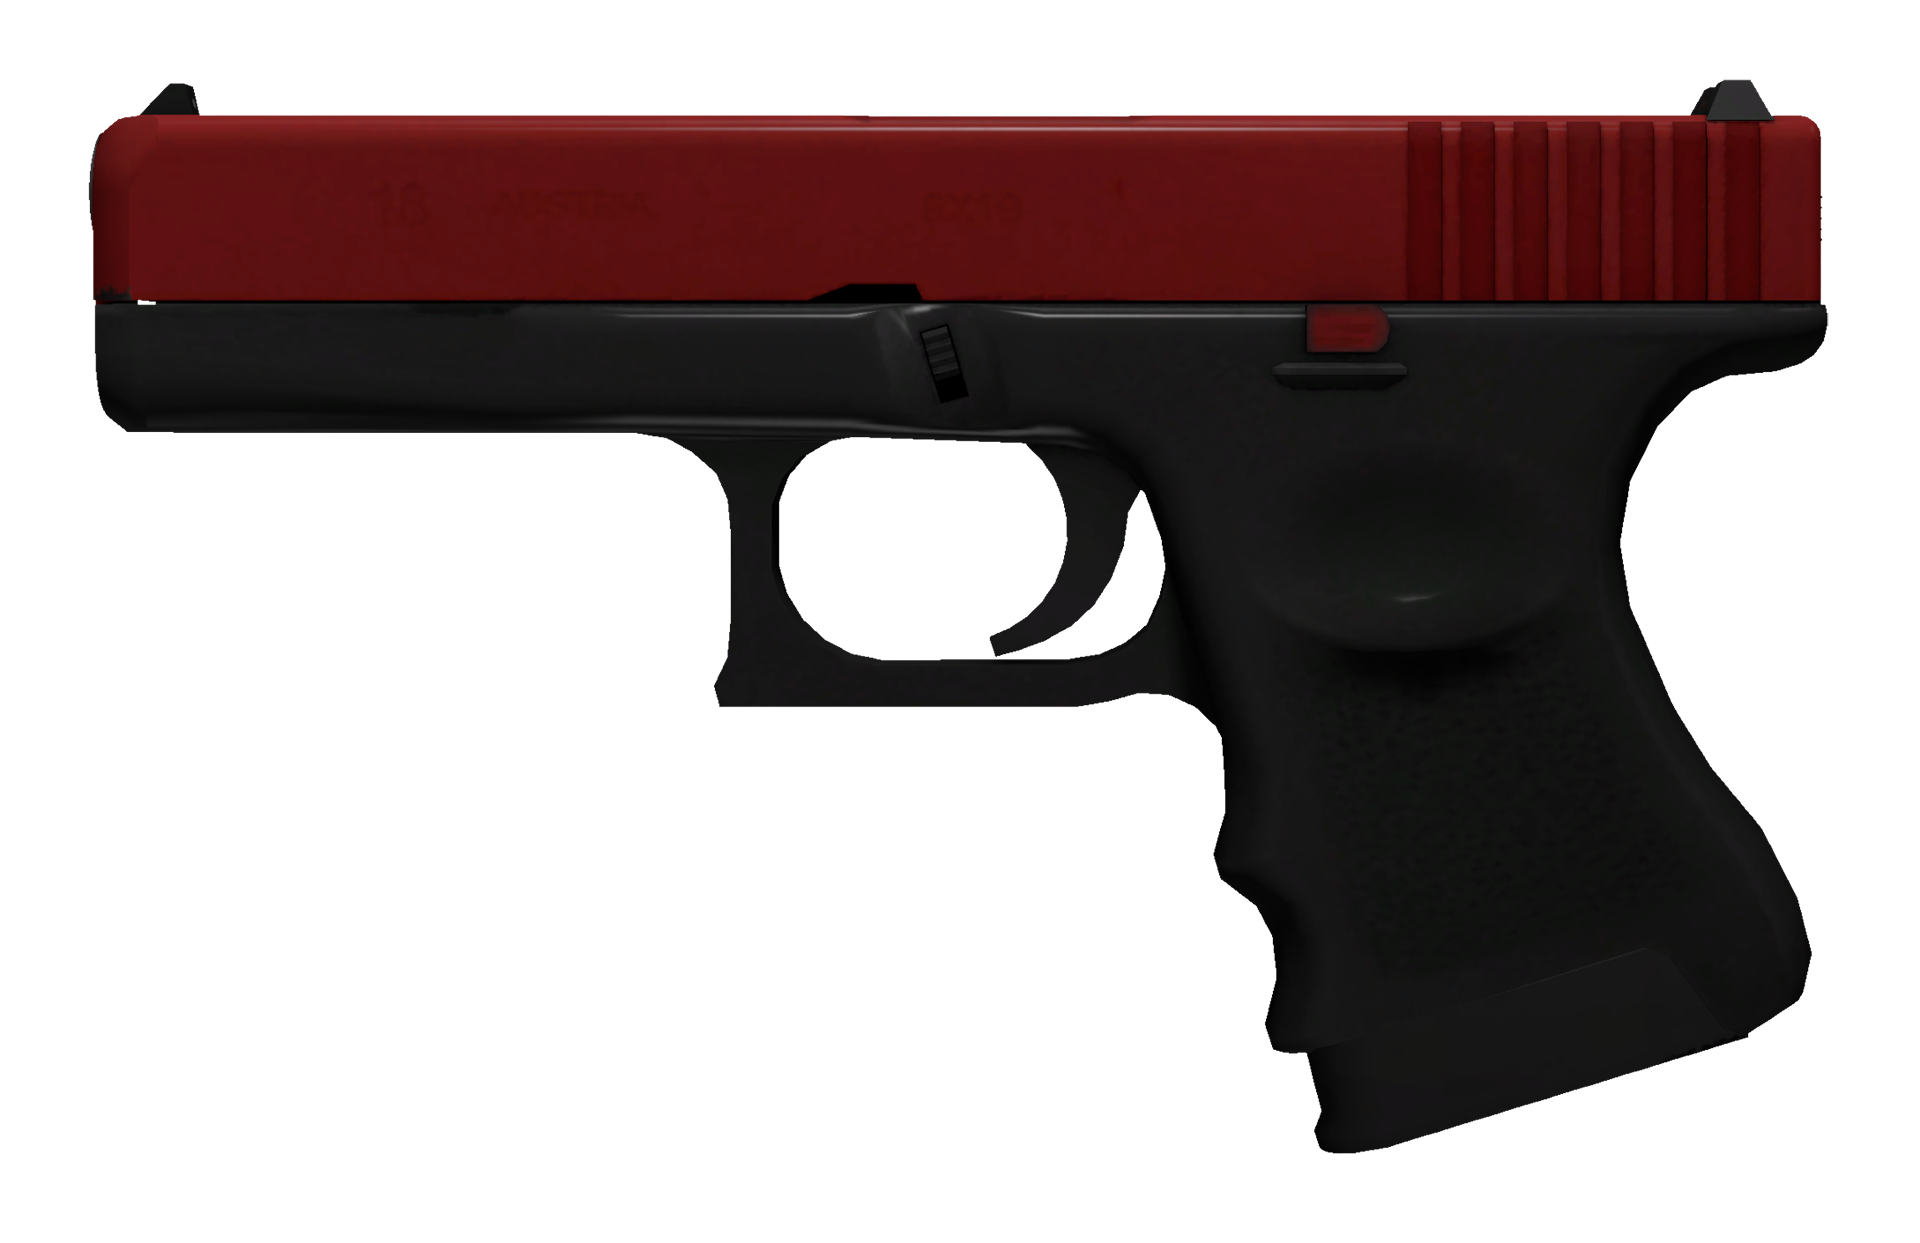 Glock-18 Candy Apple cs go skin for apple download free